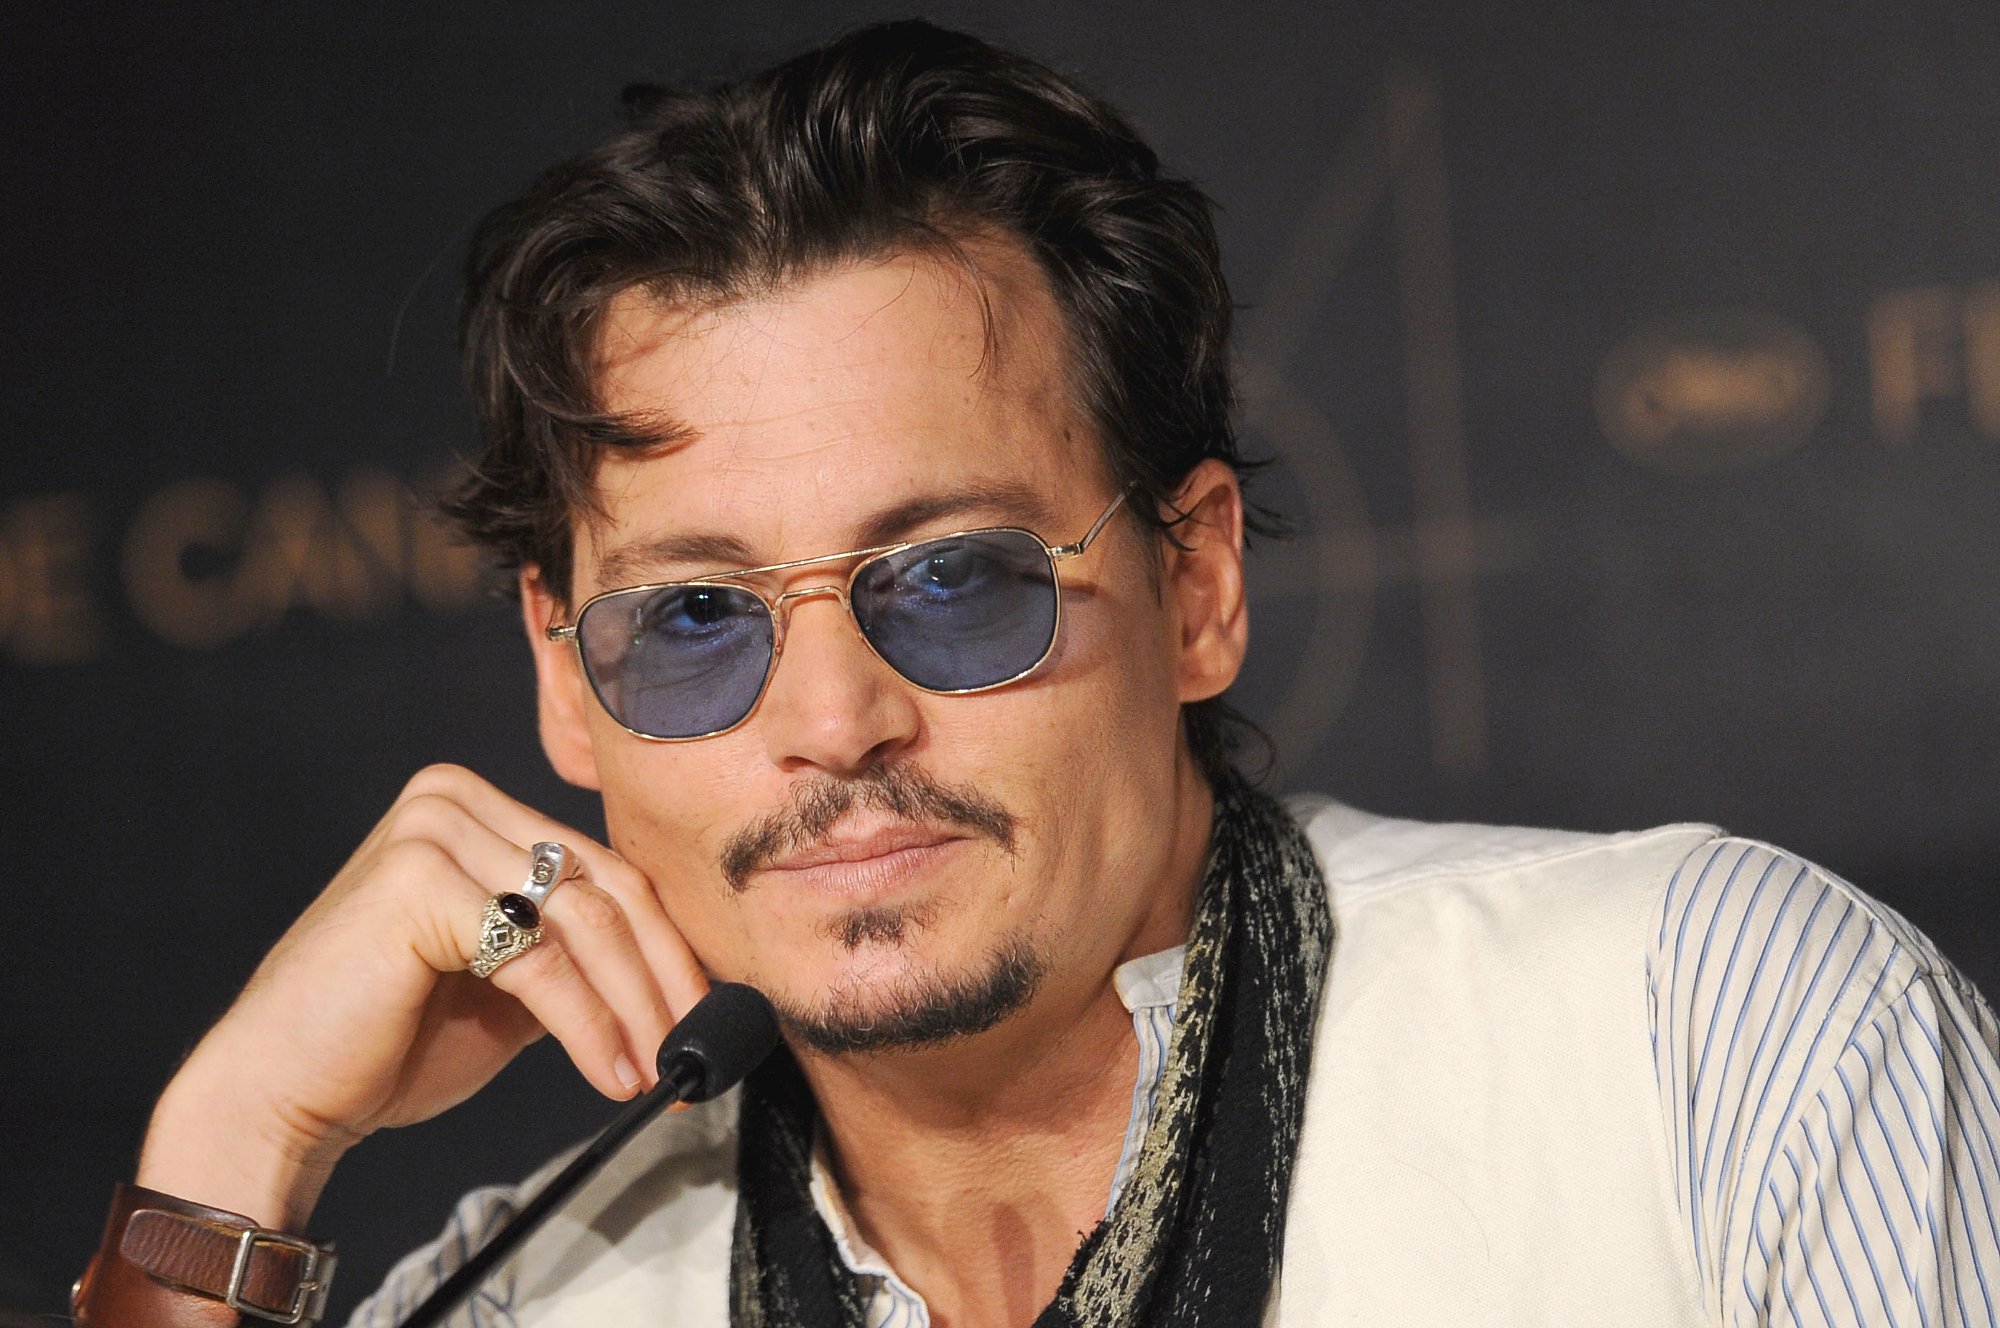 'Pirates of the Caribbean' actor Johnny Depp, who played Captain Jack Sparrow with his hand holding his head up and wearing sunglasses